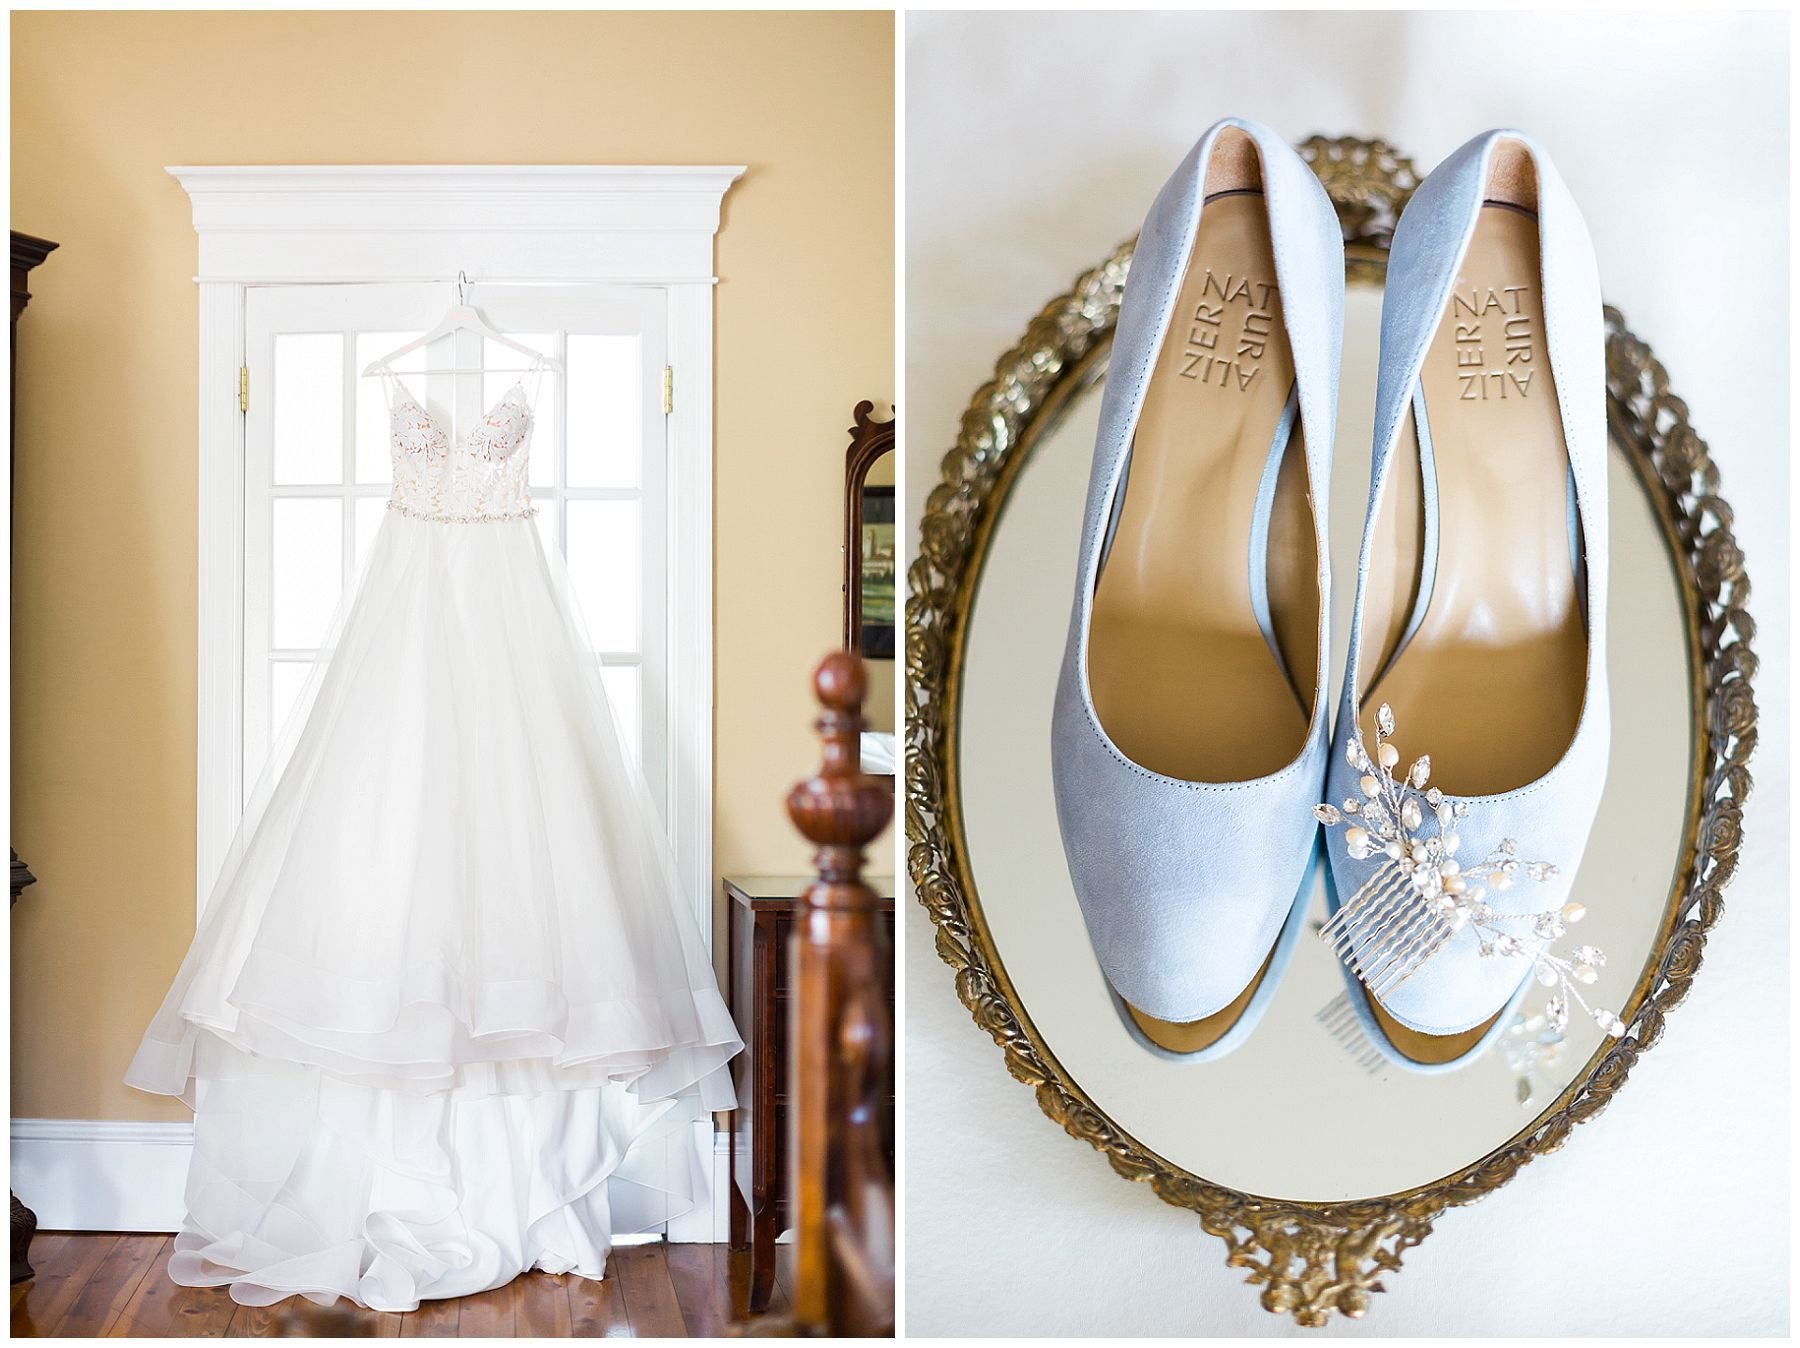 Mikaella Bridal wedding ball gown hanging on a door